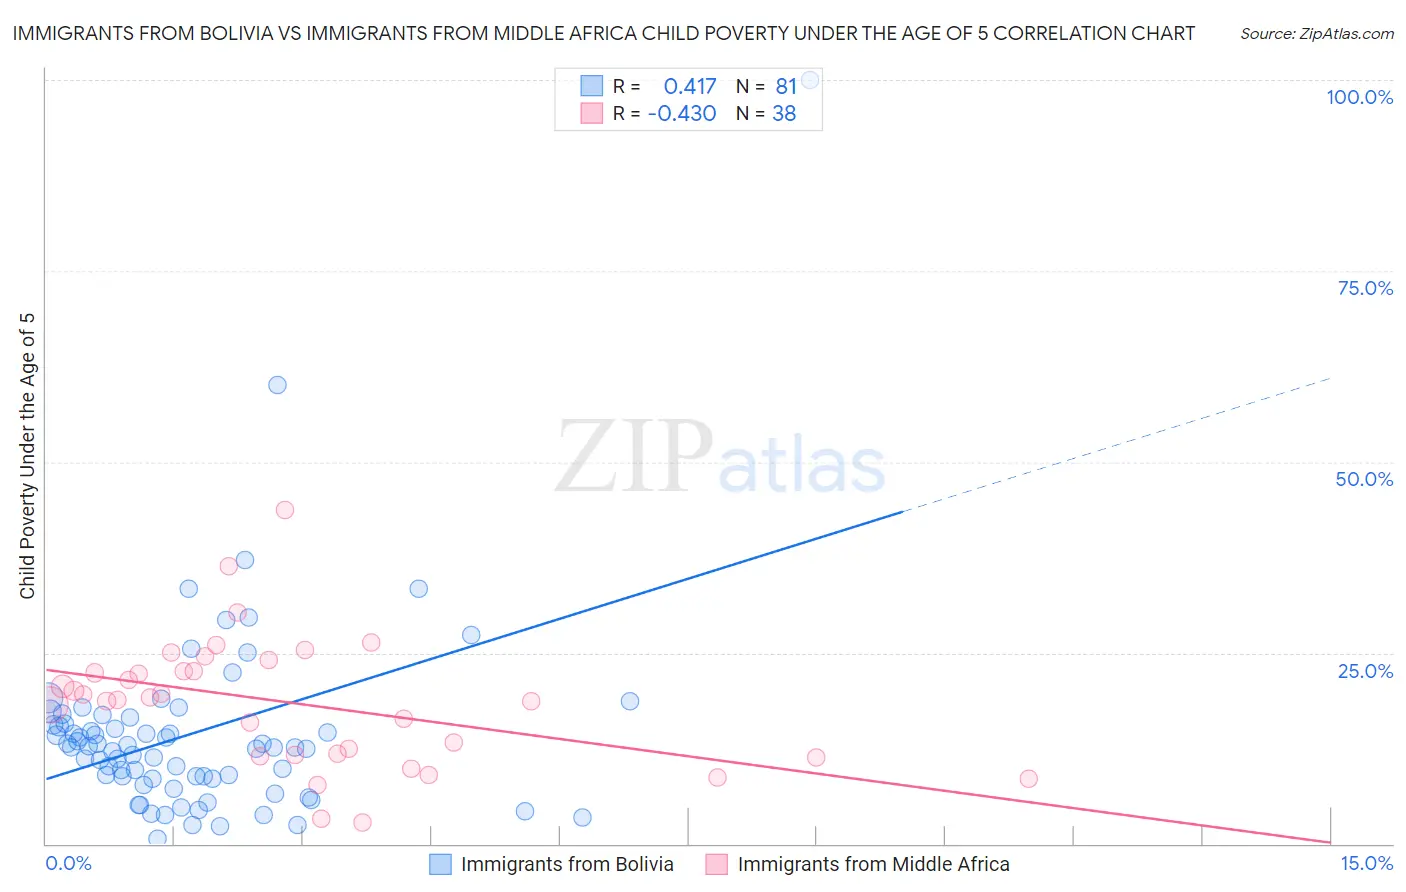 Immigrants from Bolivia vs Immigrants from Middle Africa Child Poverty Under the Age of 5